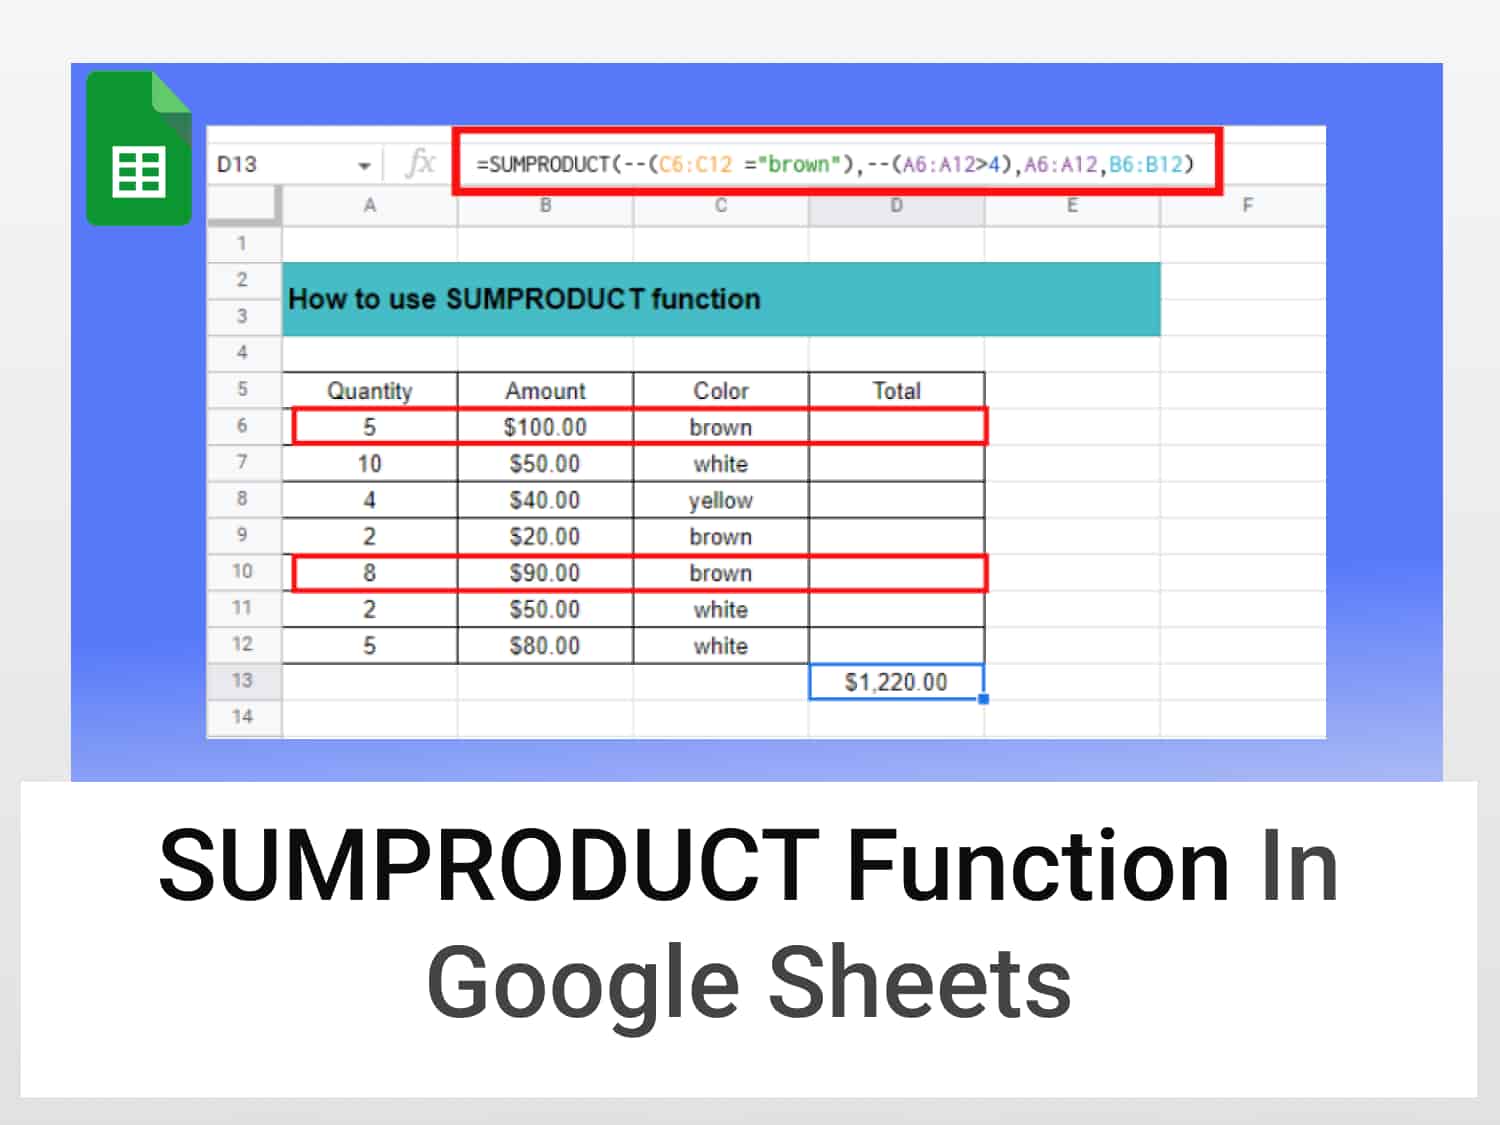 SUMPRODUCT function in Google Sheets